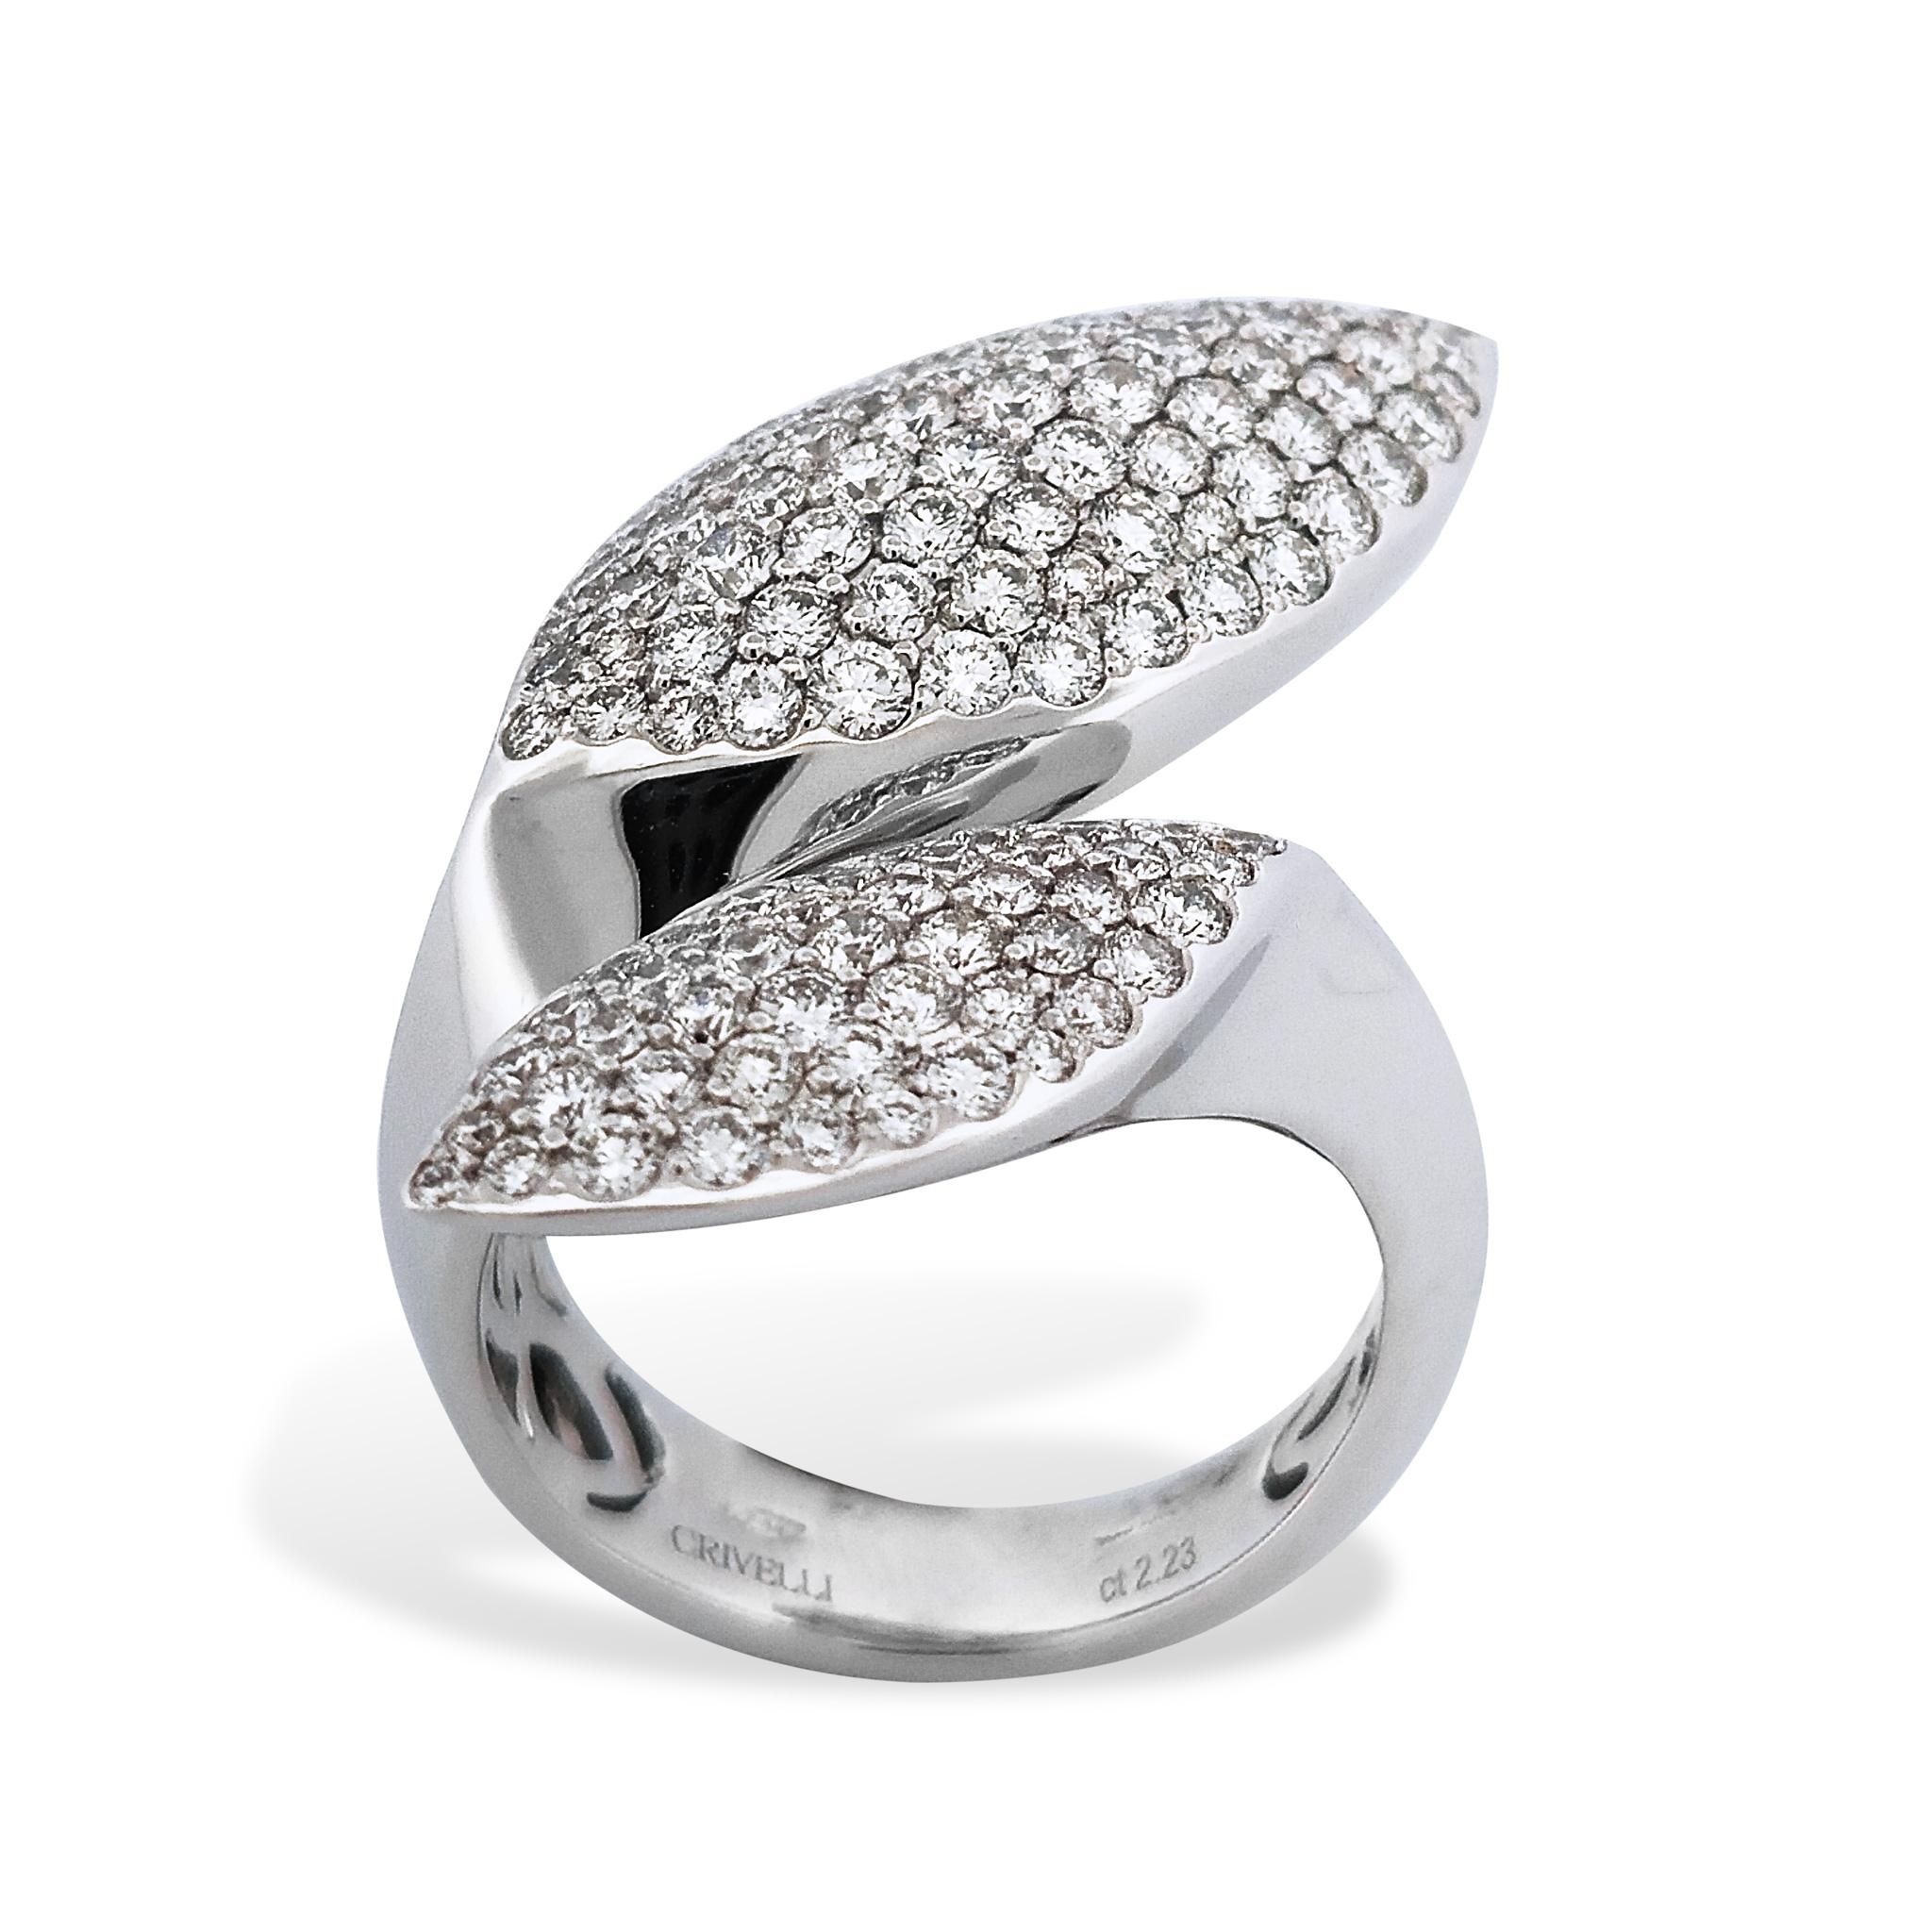 2.23 Carat Diamond Pave 18 Karat White Gold Cocktail Ring In New Condition For Sale In Miami, FL